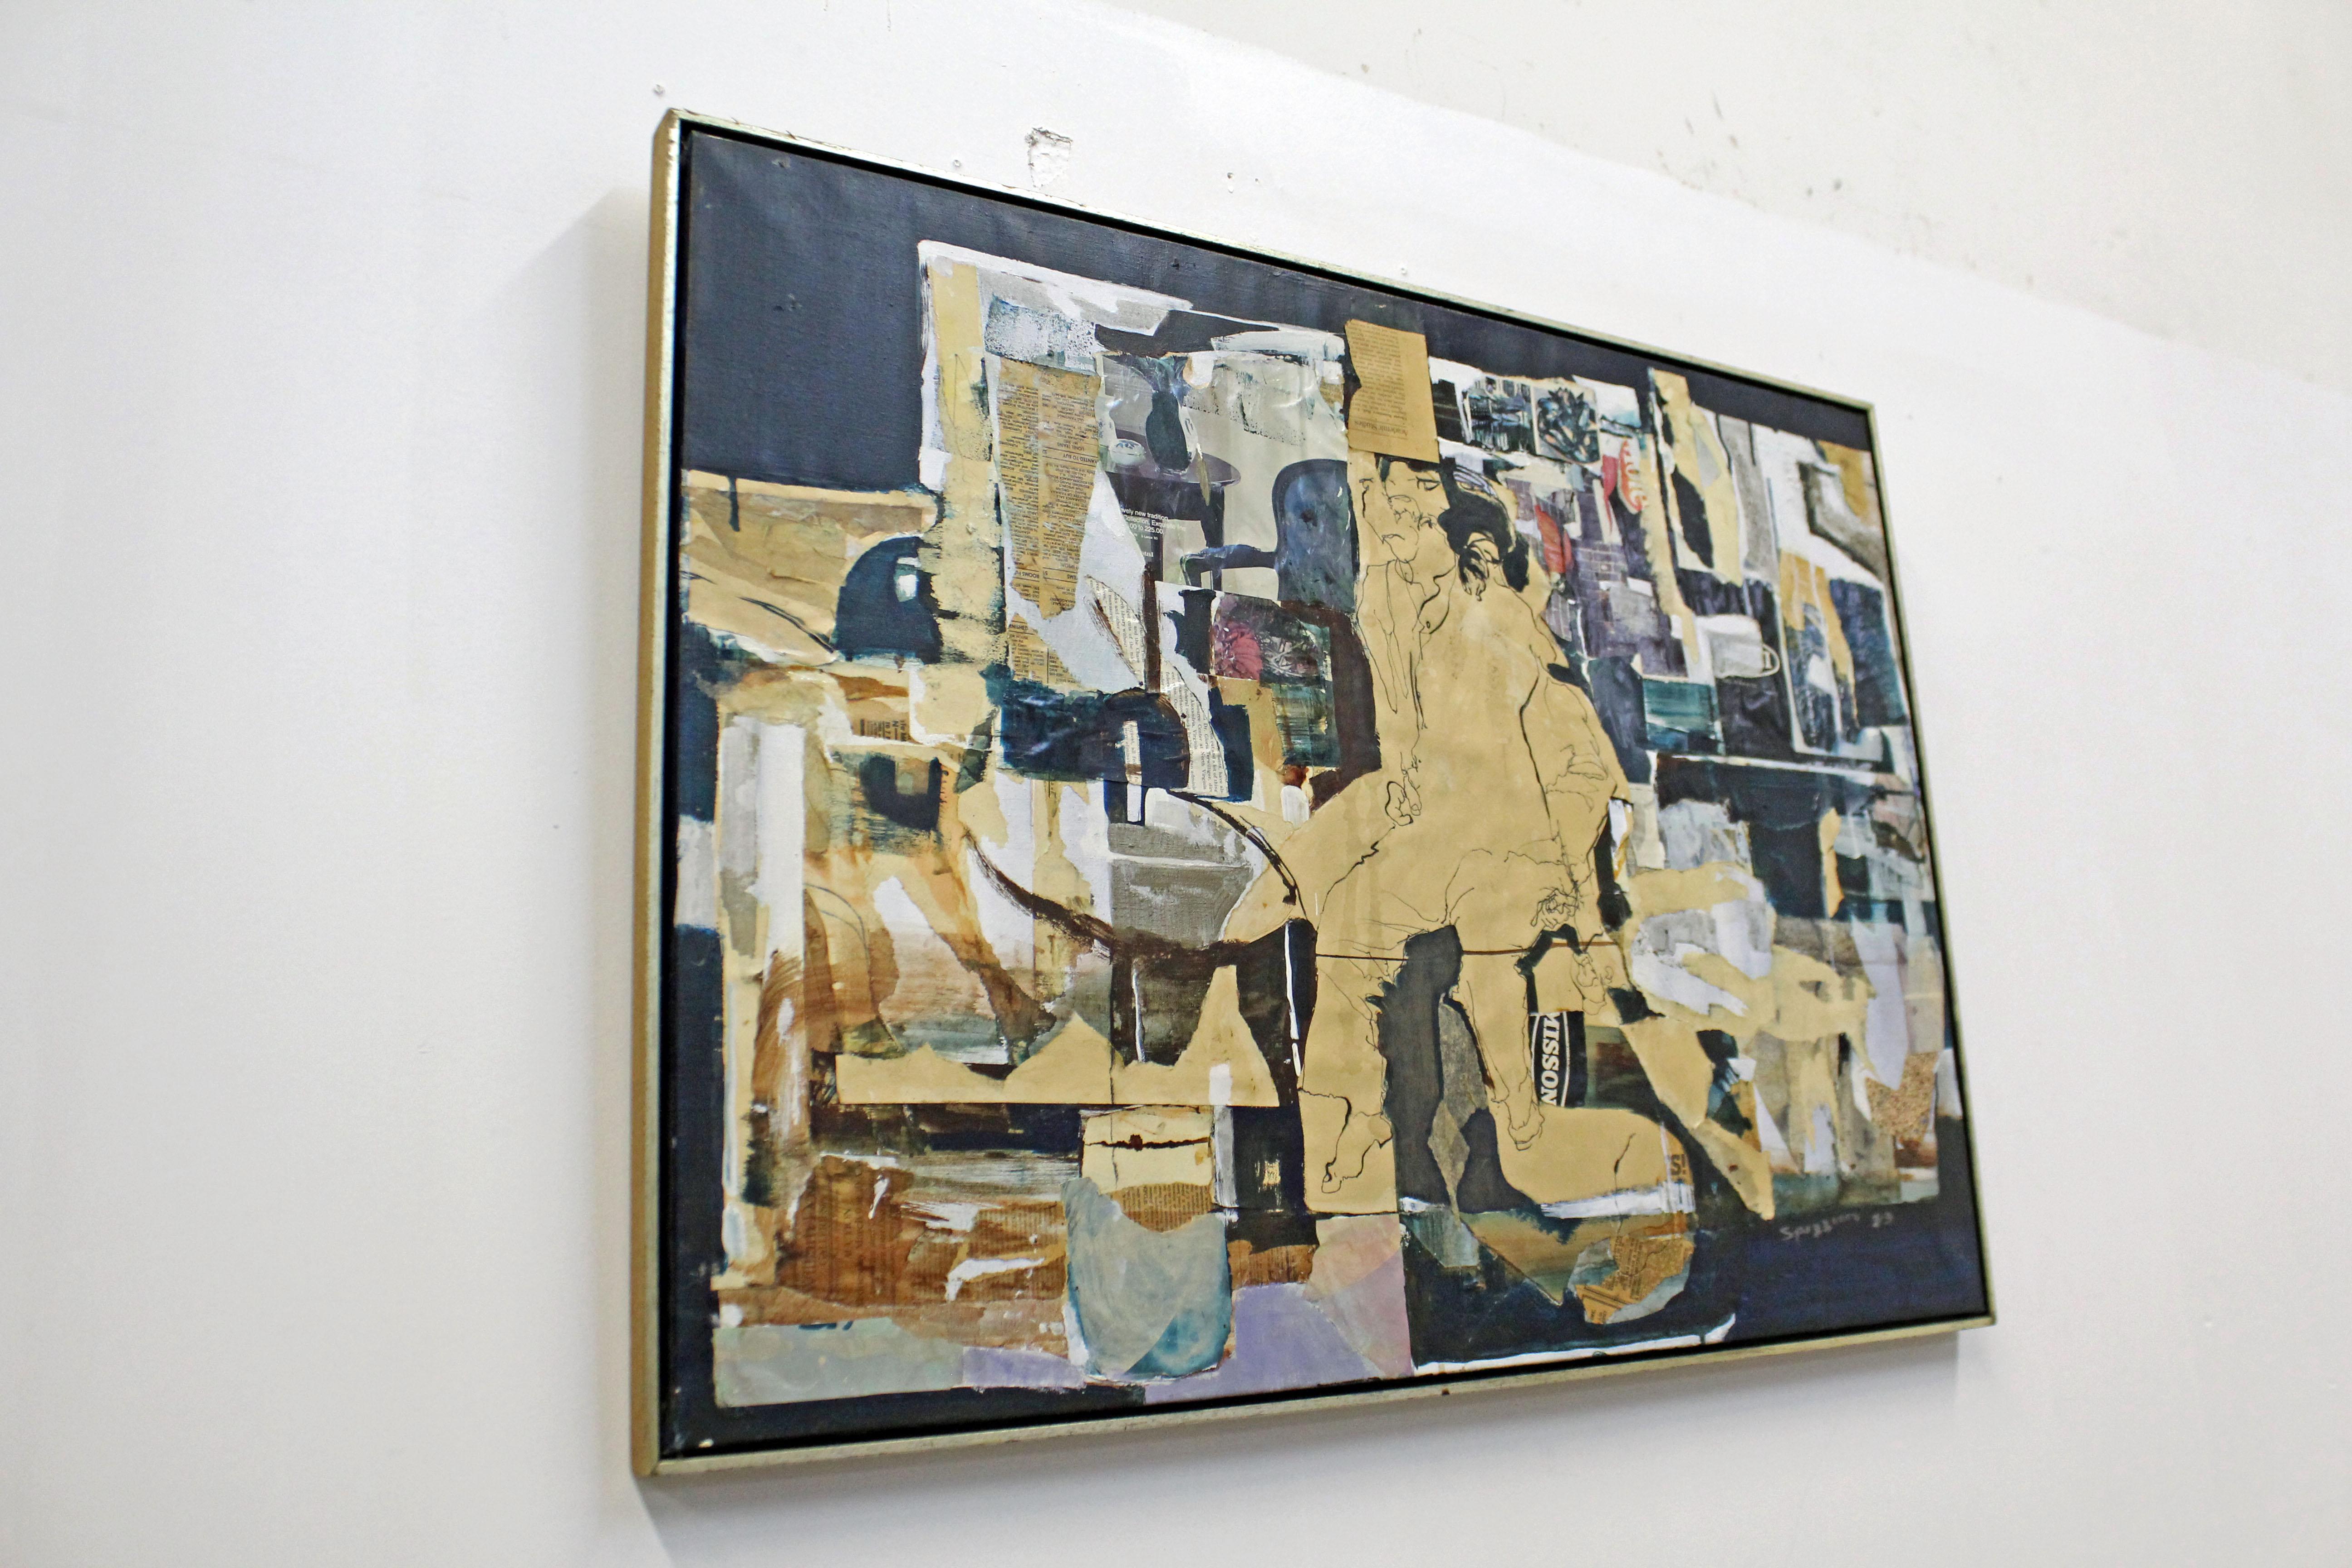 Offered is a large vintage modern/abstract collage on canvas by Peter Spizzirri of Greenwich, CT. Features old pieces of newspaper and magazine glued and painted over on a painted black background. It is in good condition, shows slight age wear on